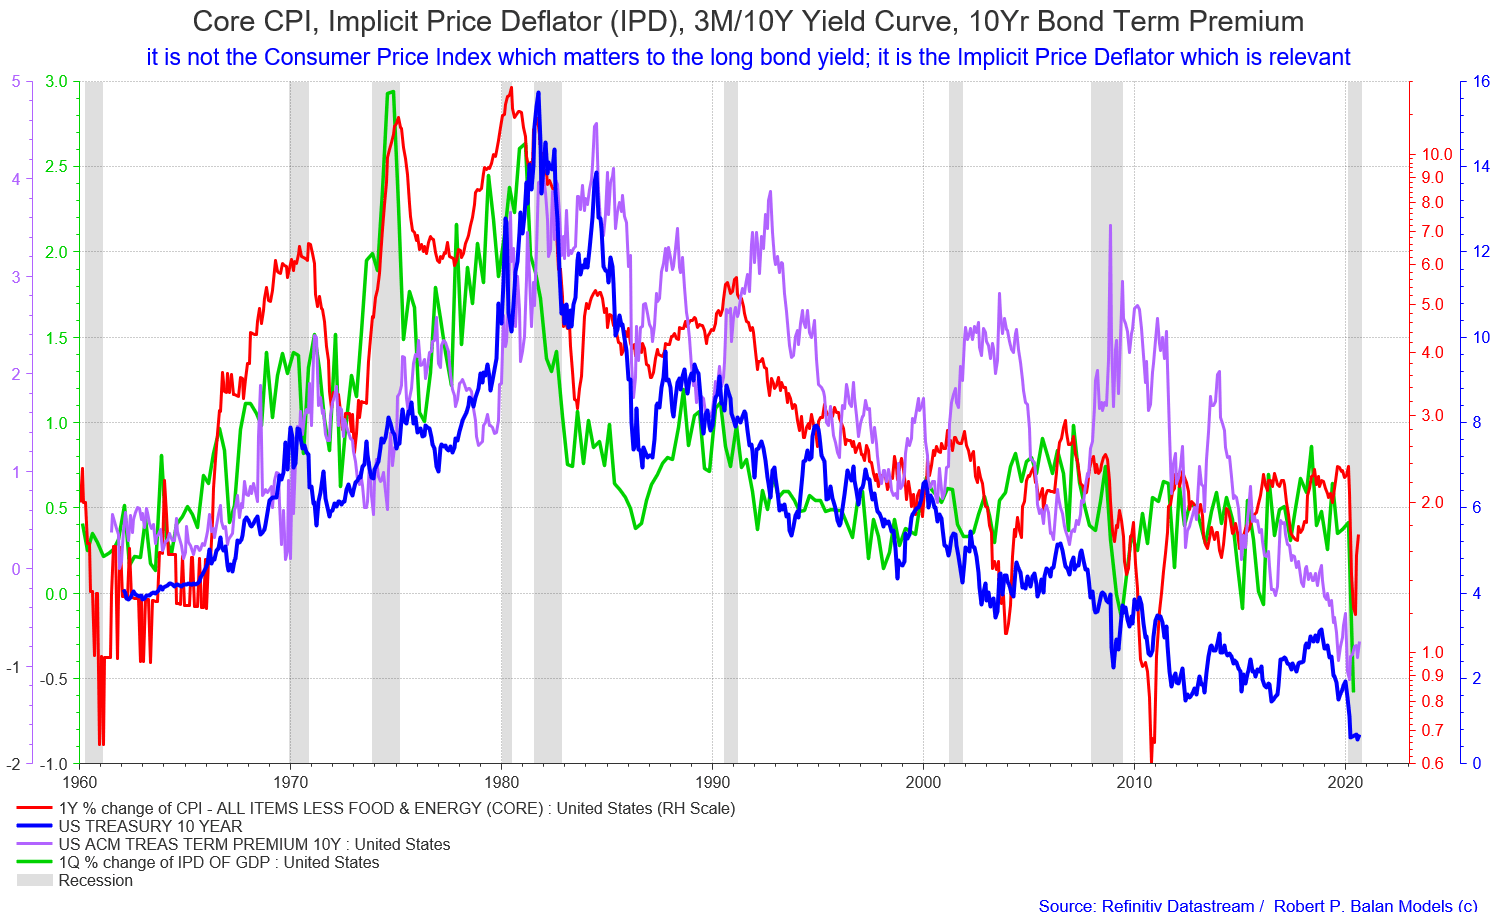 The Fed S New Looser Policy On Inflation It Will Steepen The Yield Curves With The Back End Rising The Most Seeking Alpha